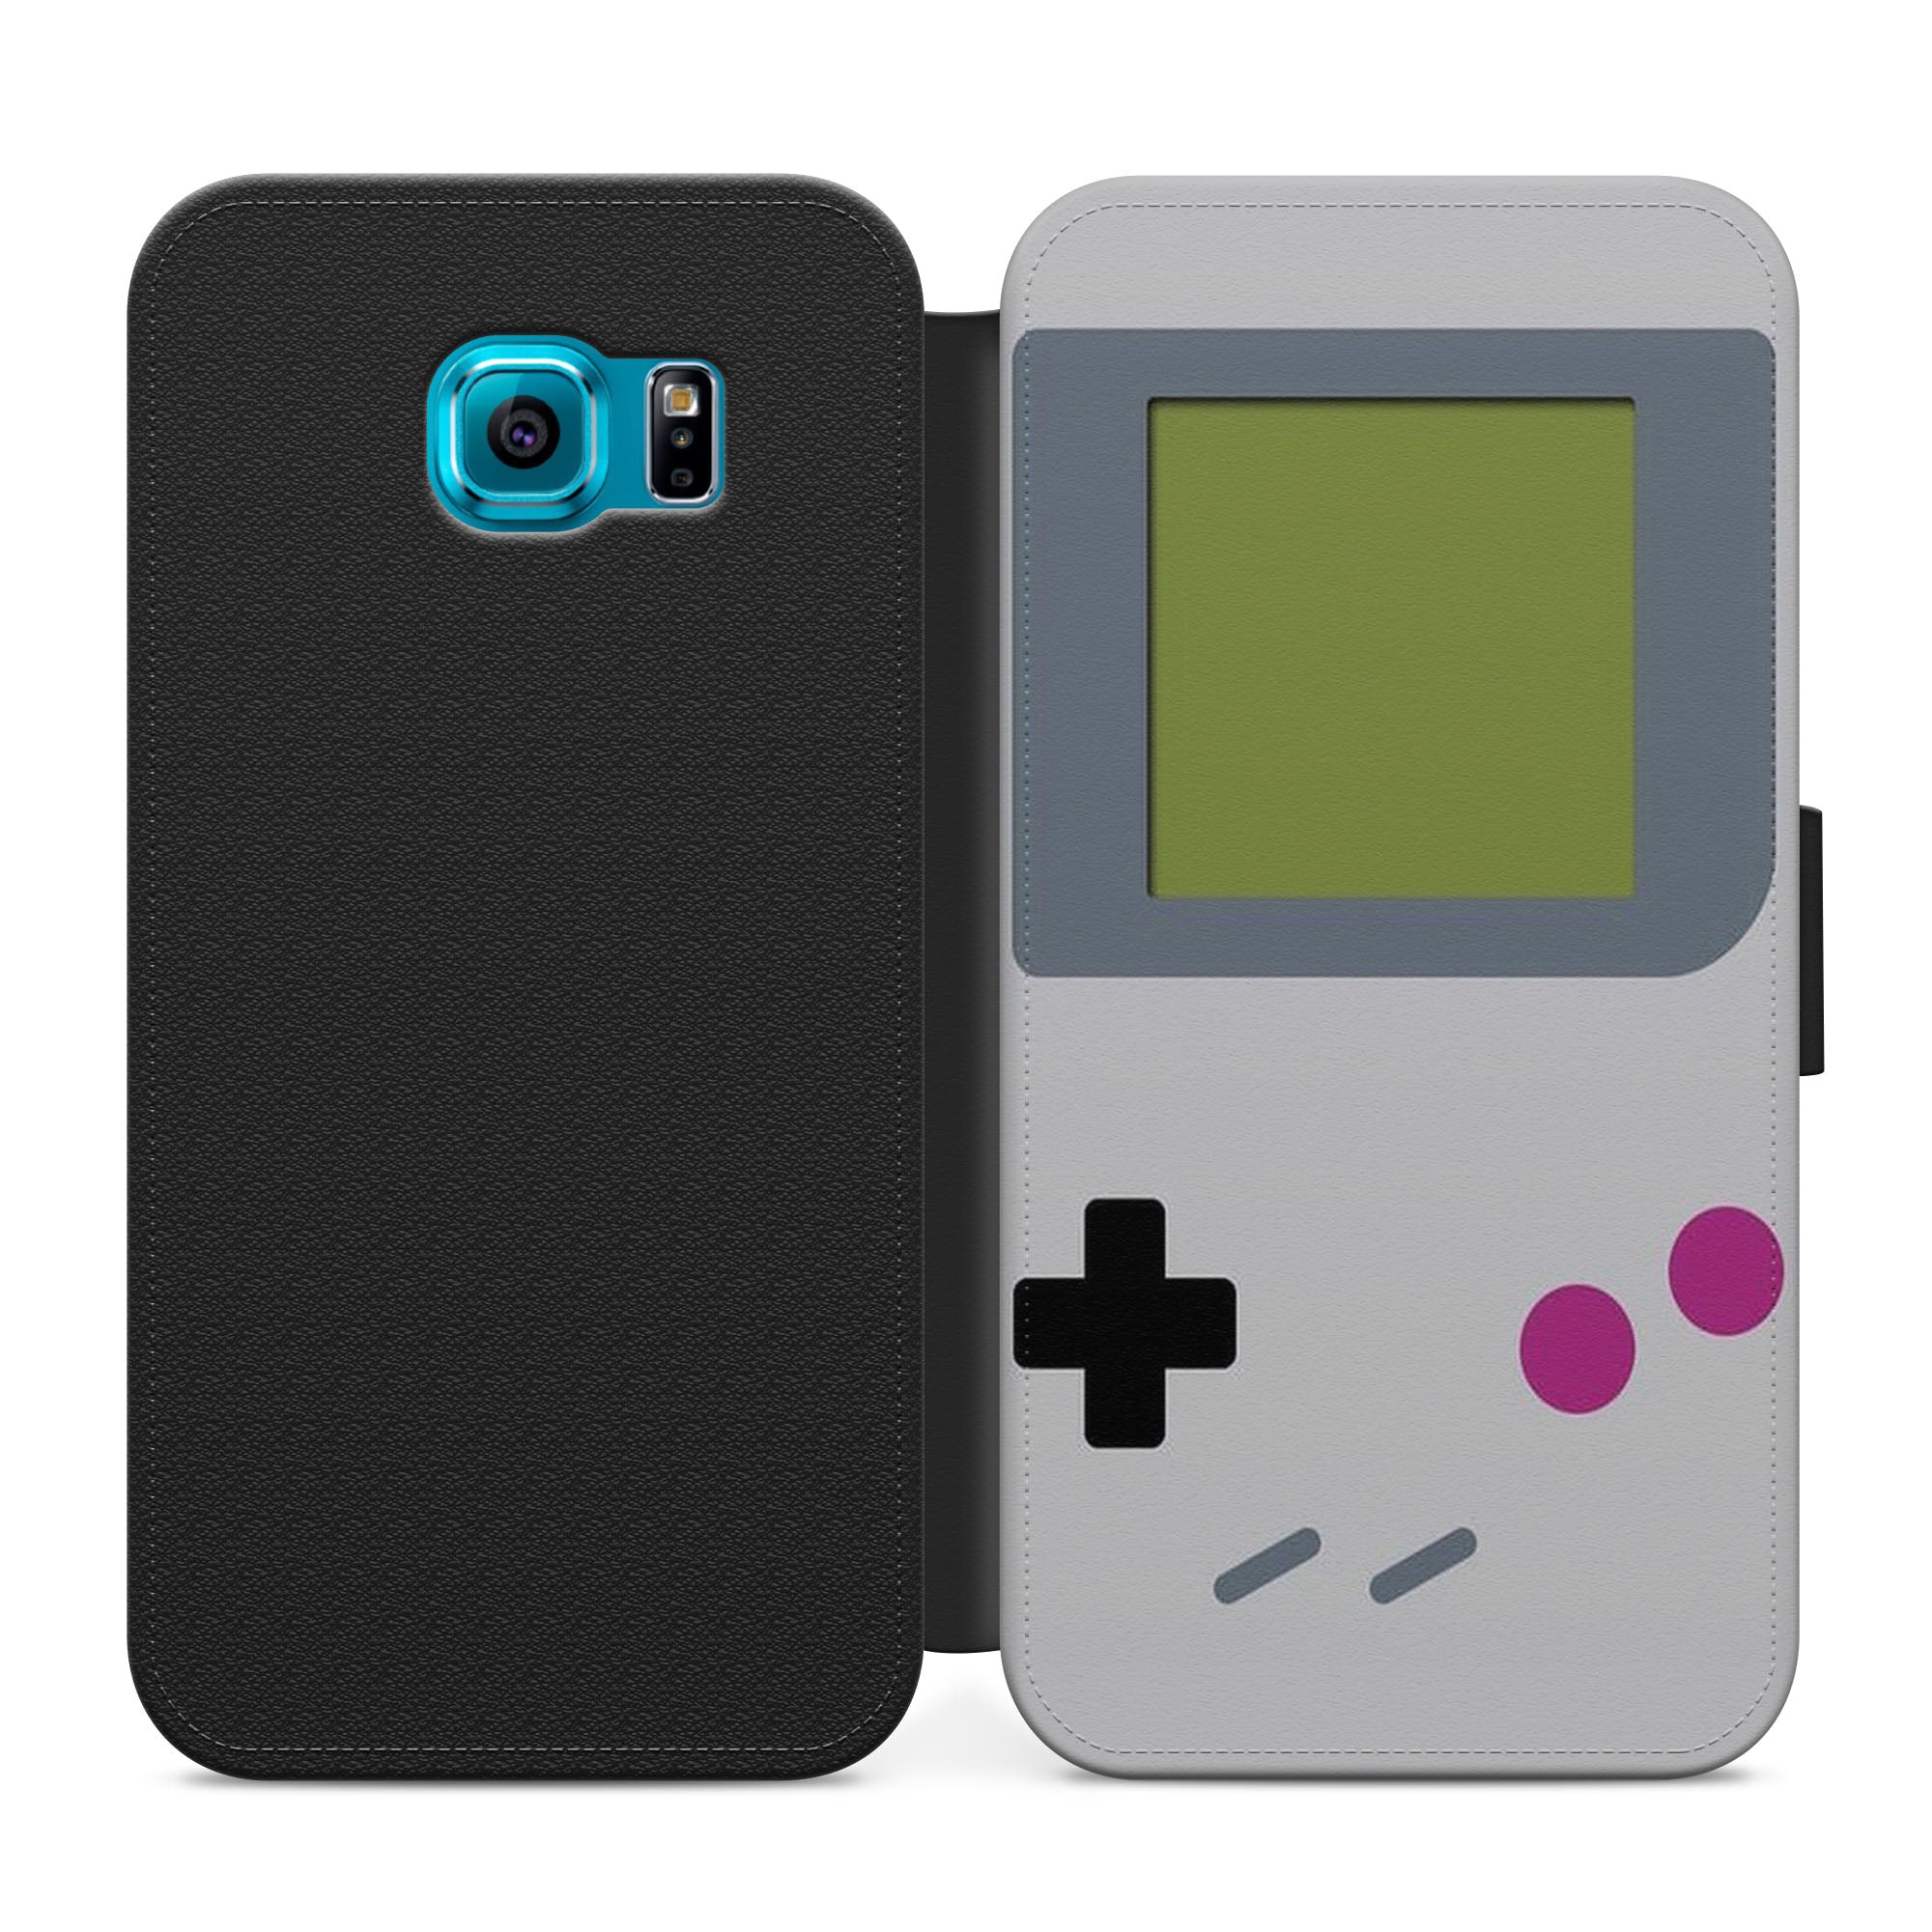 Retro Gameboy Grey Faux Leather Flip Case Wallet for iPhone / Samsung